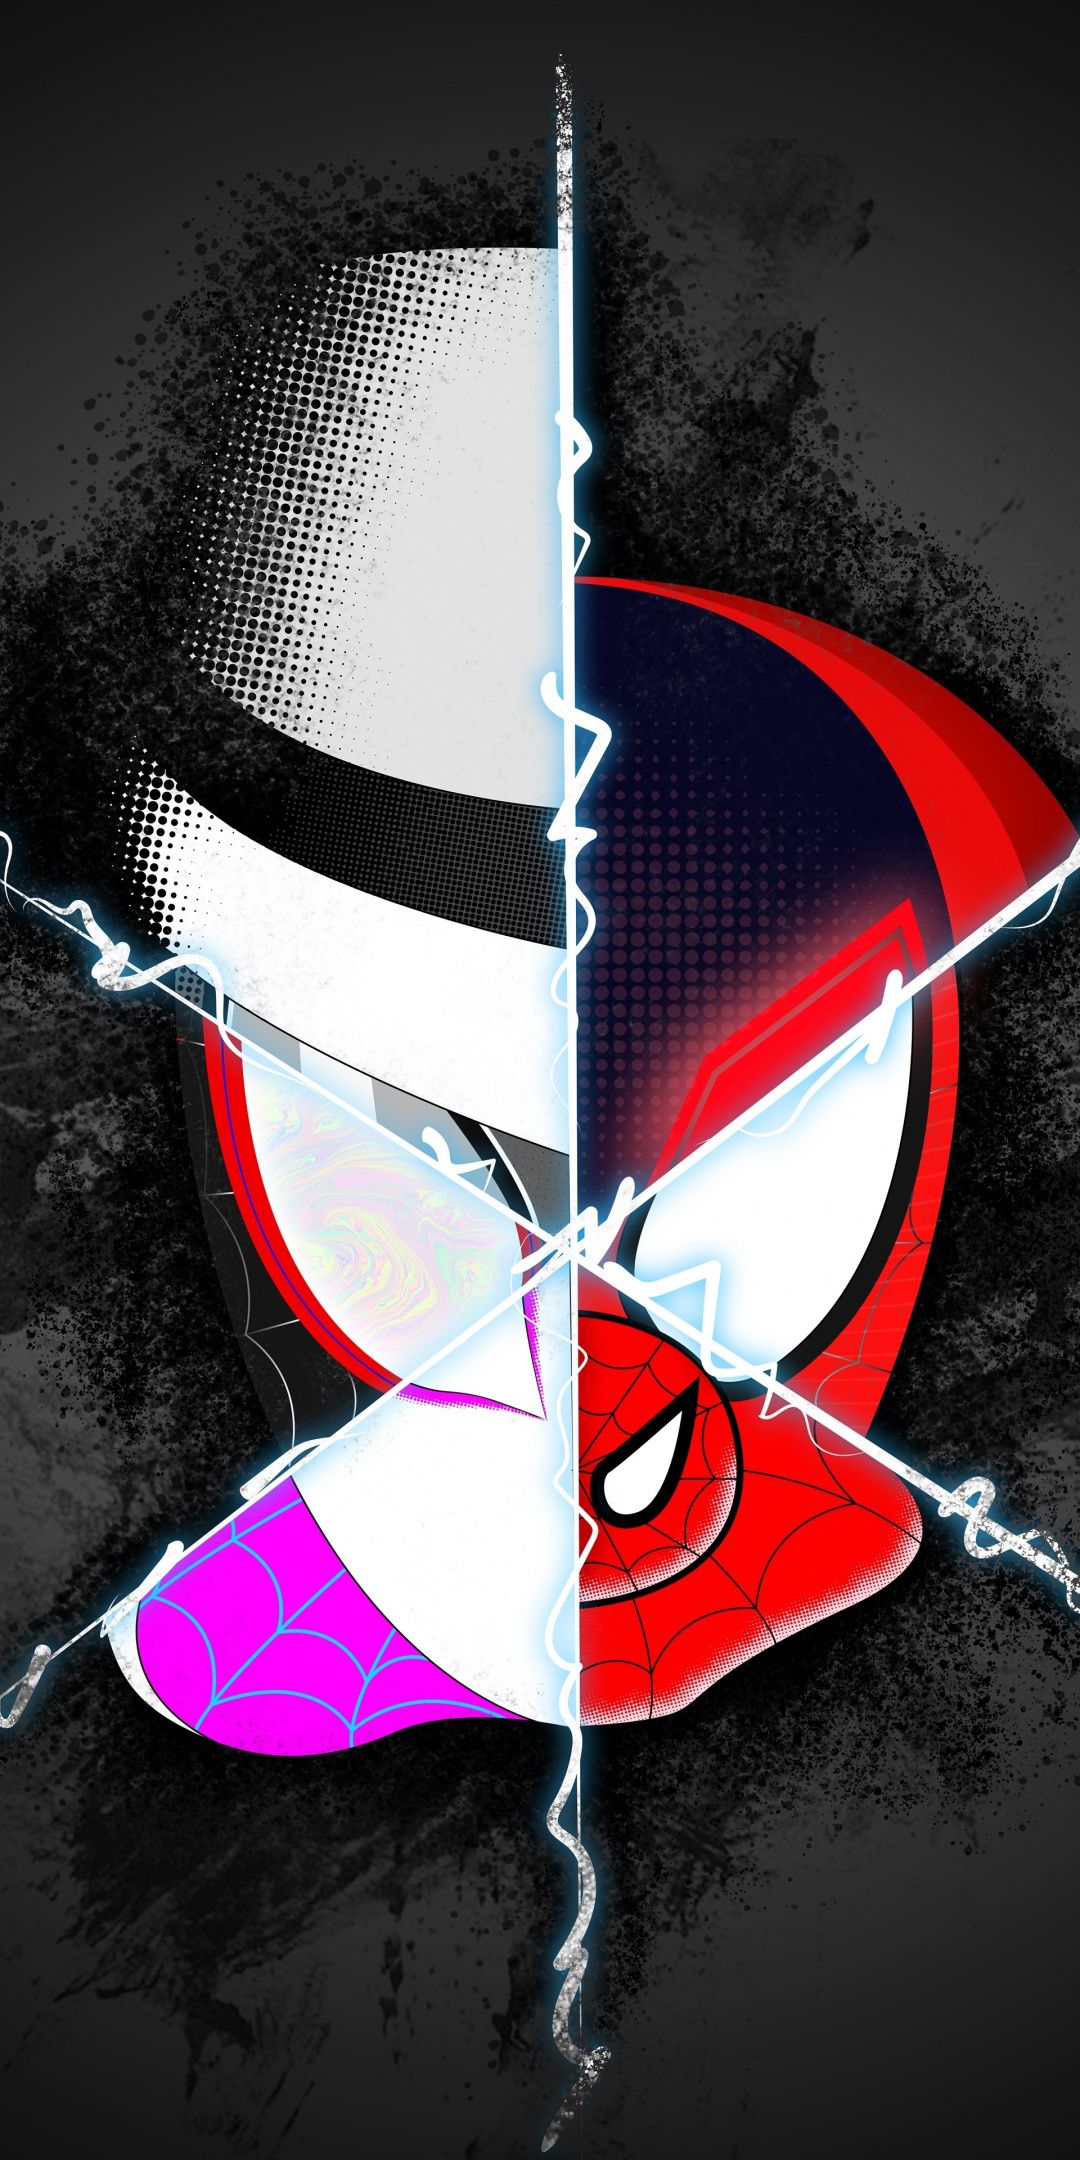 Spider-Man Into The Spider-Verse 2019 Wallpapers